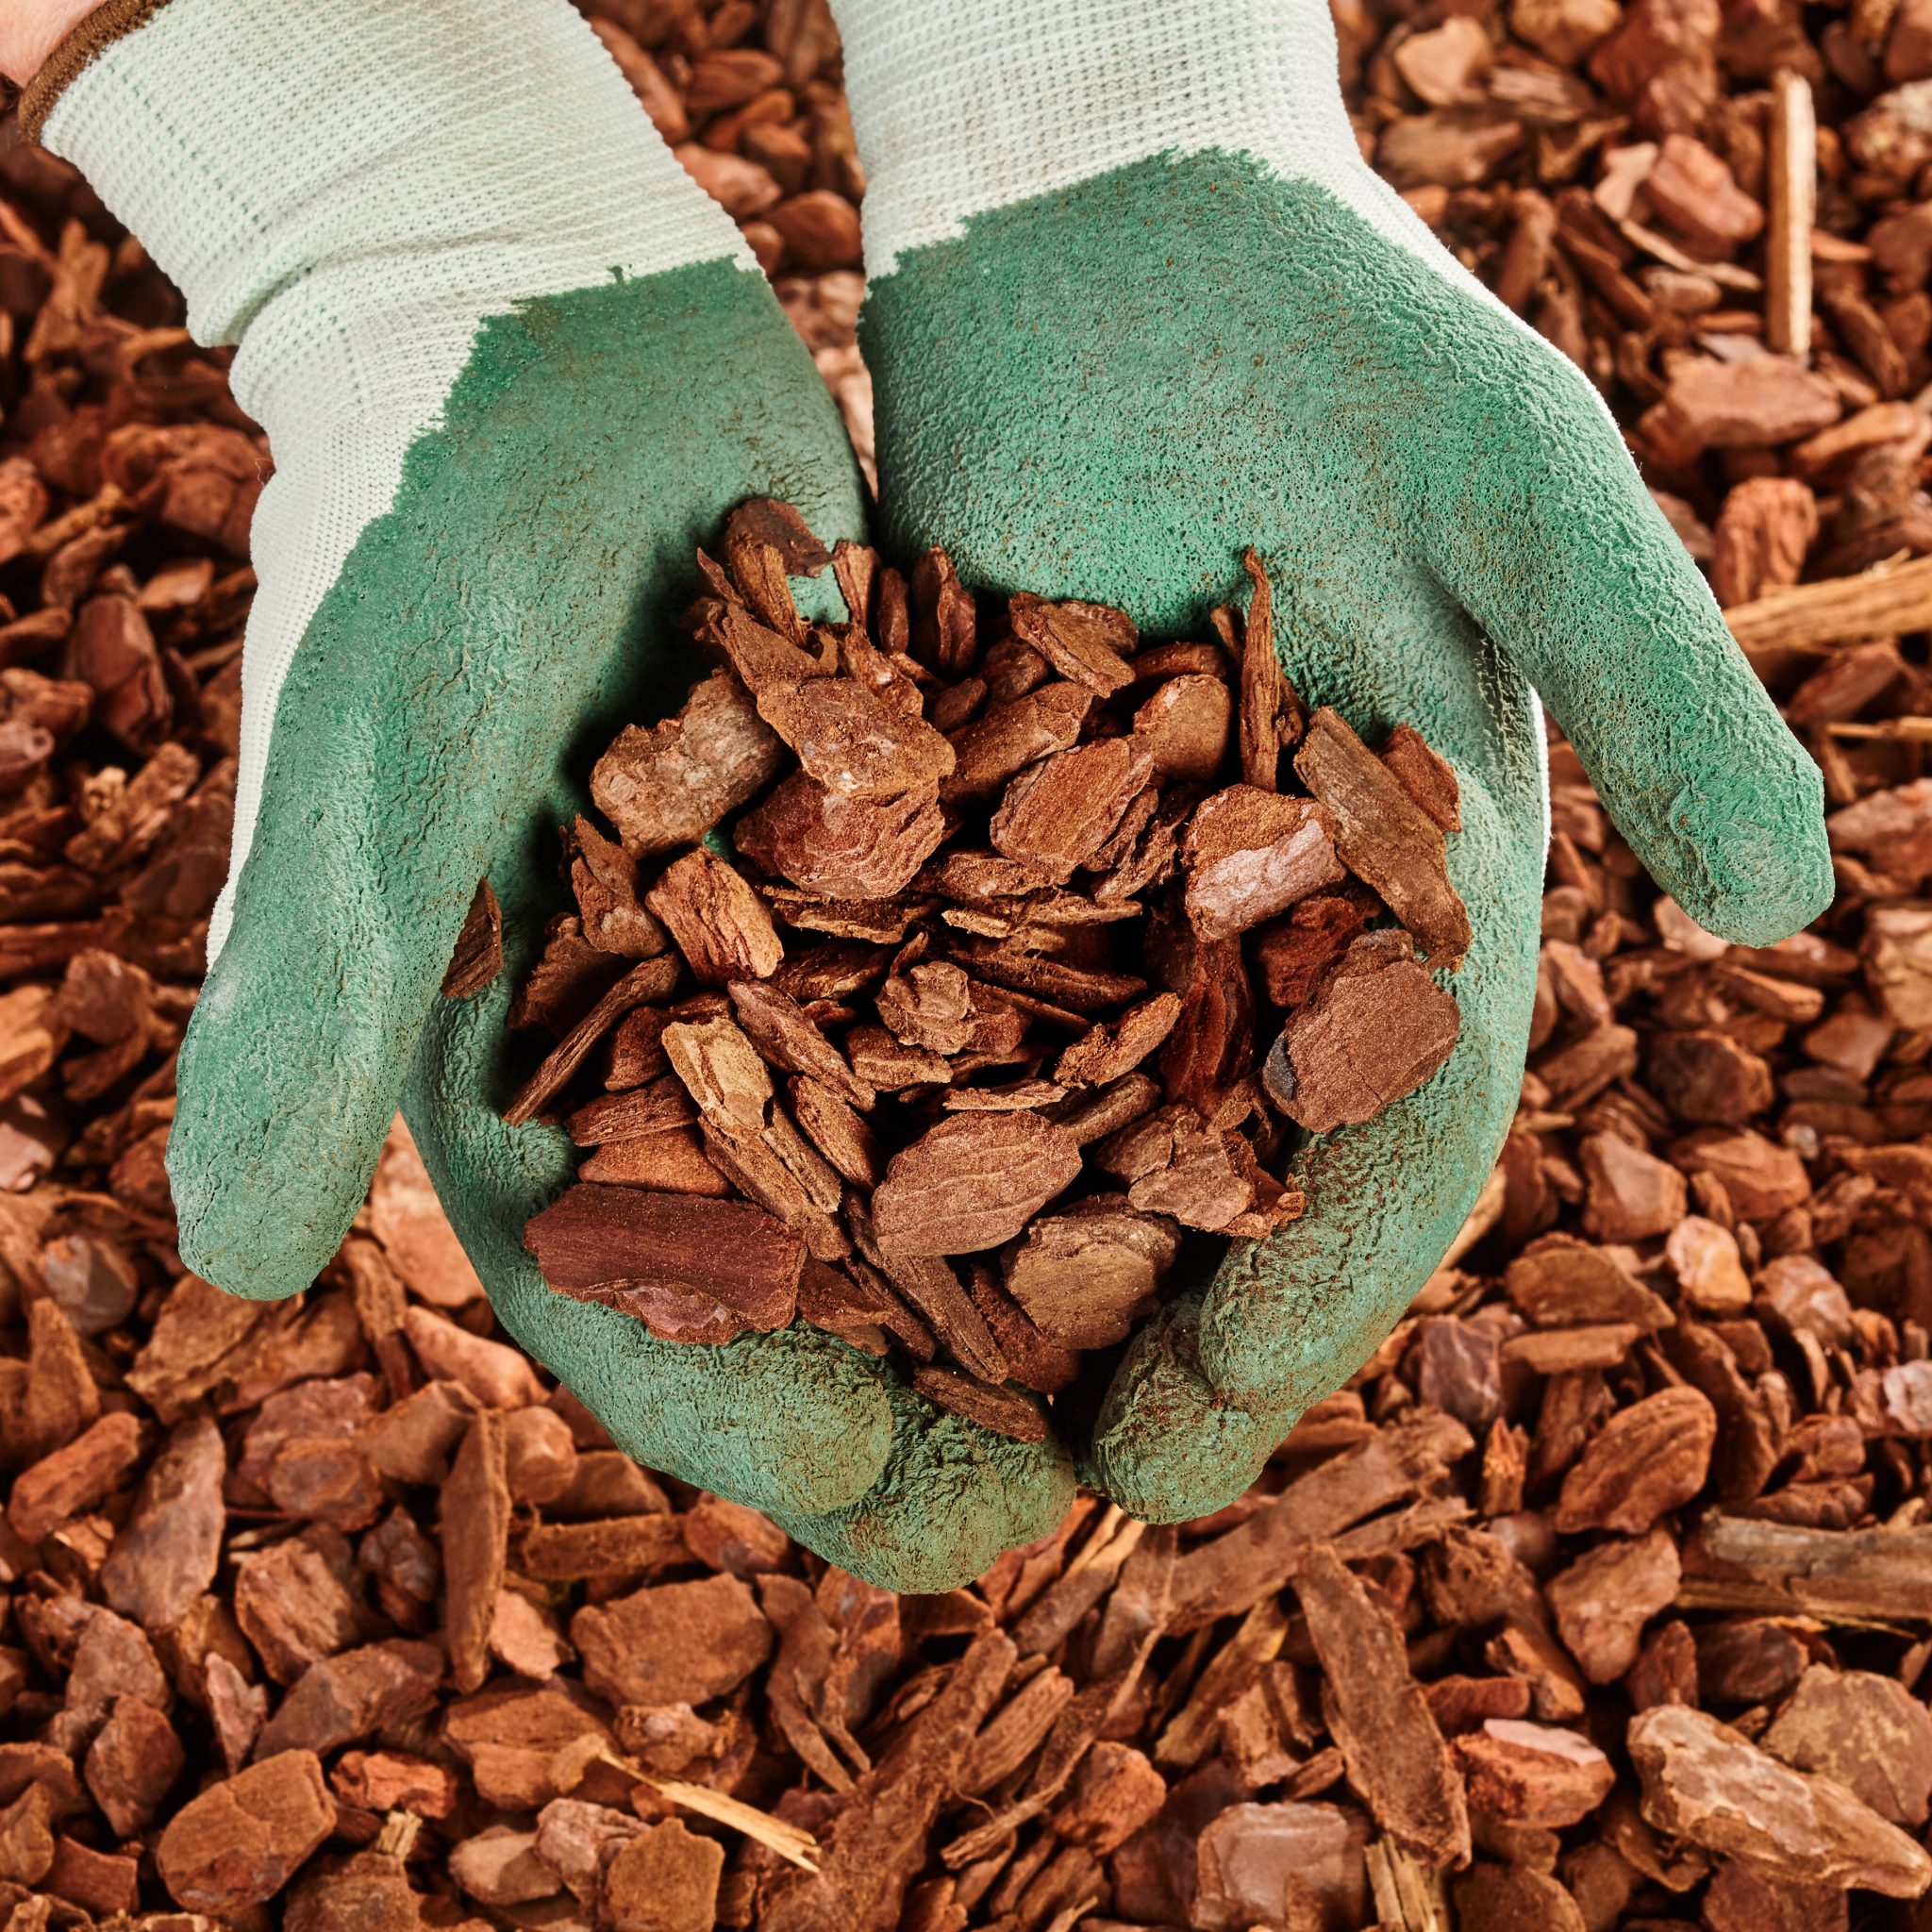 How Often Should I Replace Mulch?